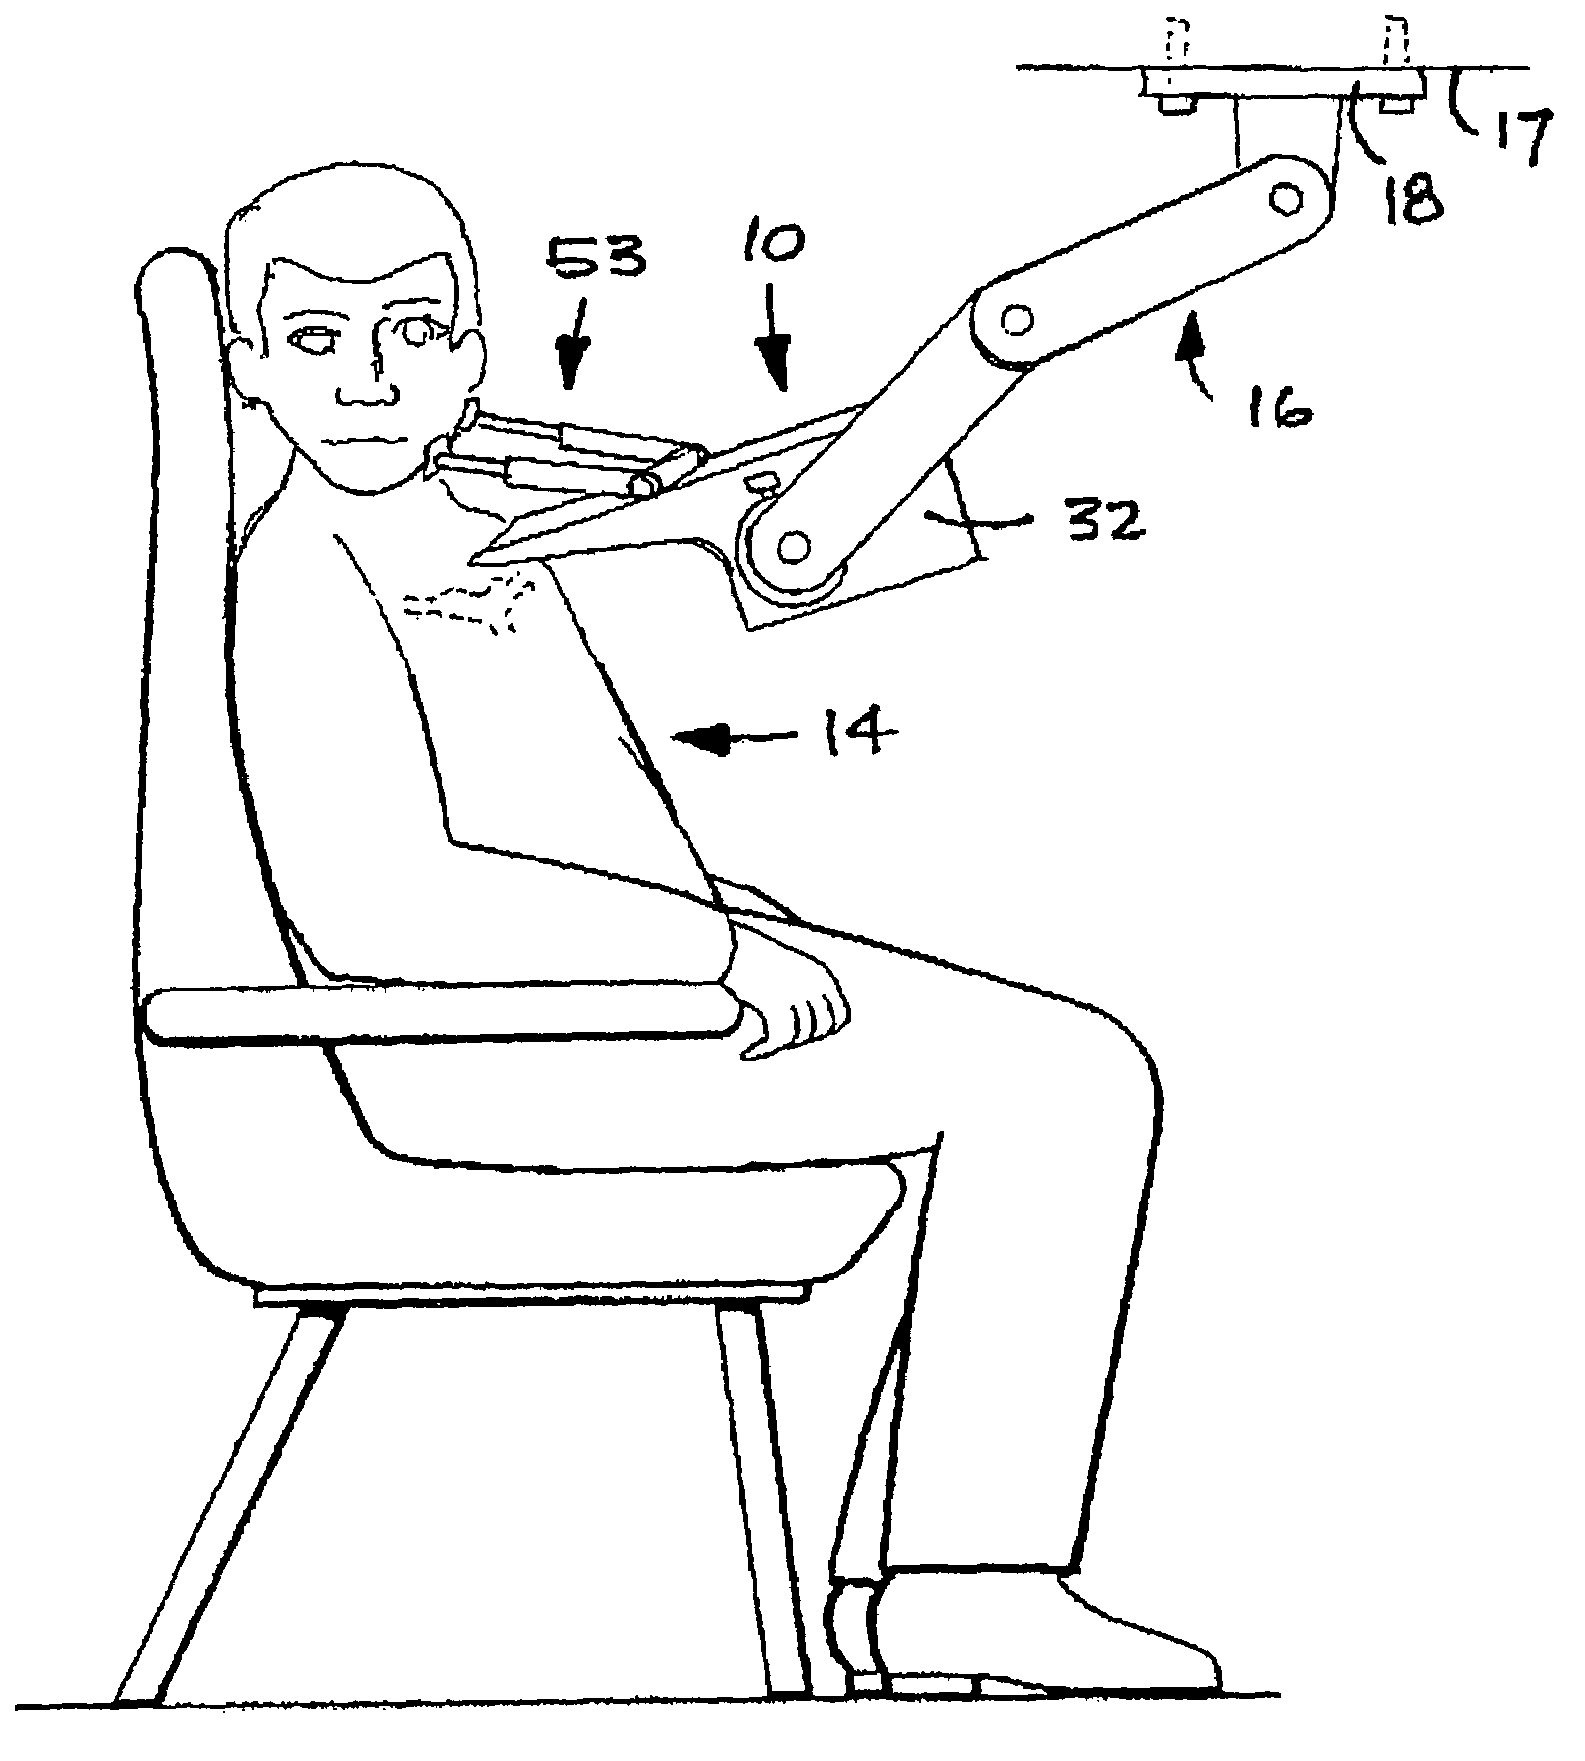 Methods of and apparatus for monitoring heart motions